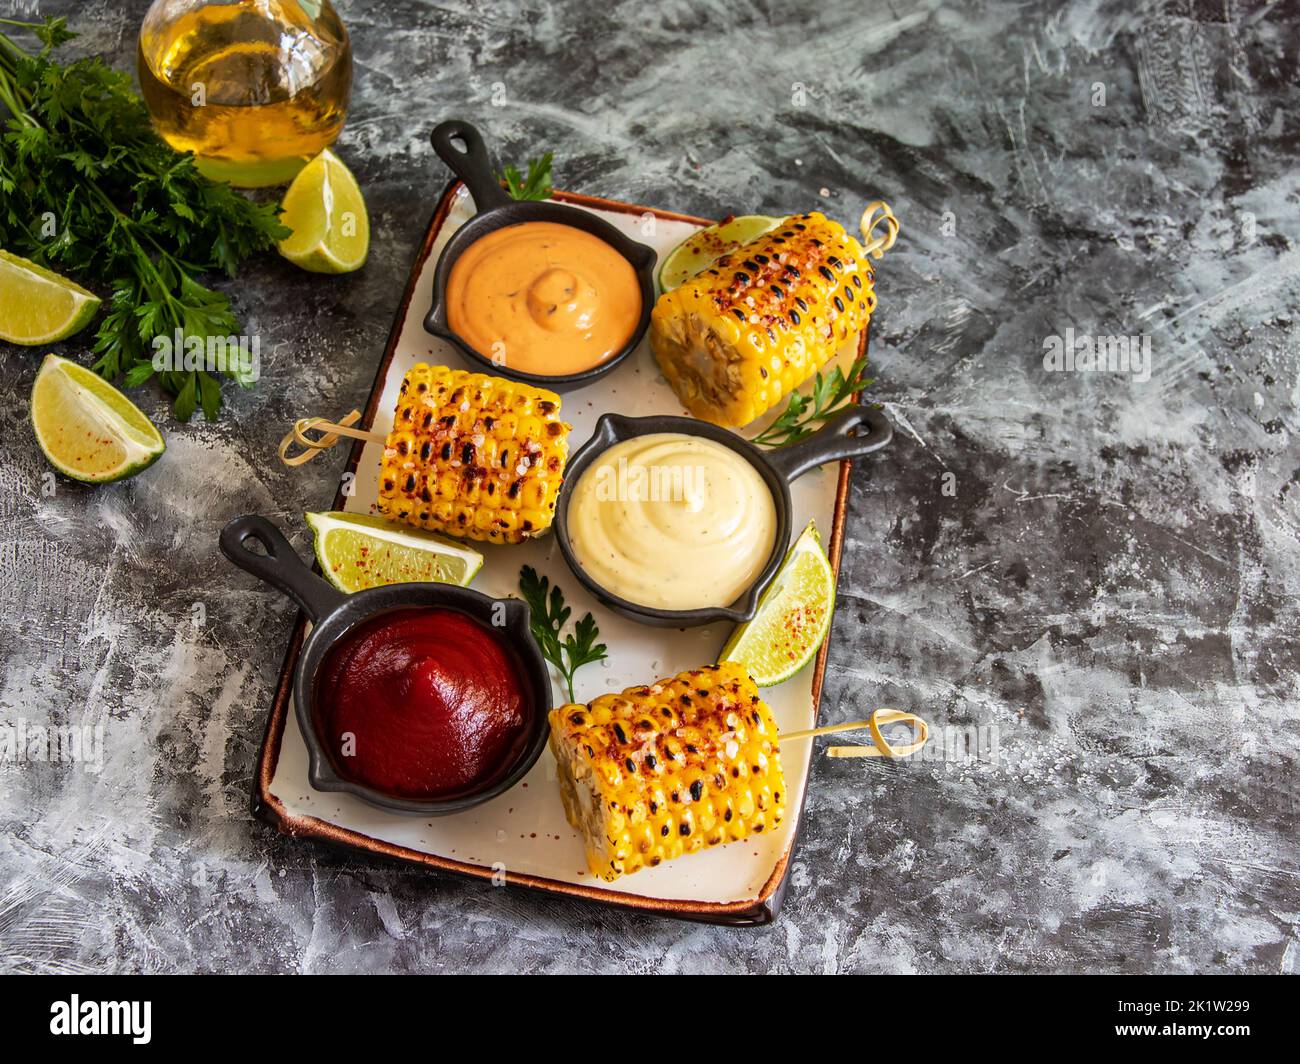 grilled yellow head corn with spices lime with white red orange sauce portion Stock Photo